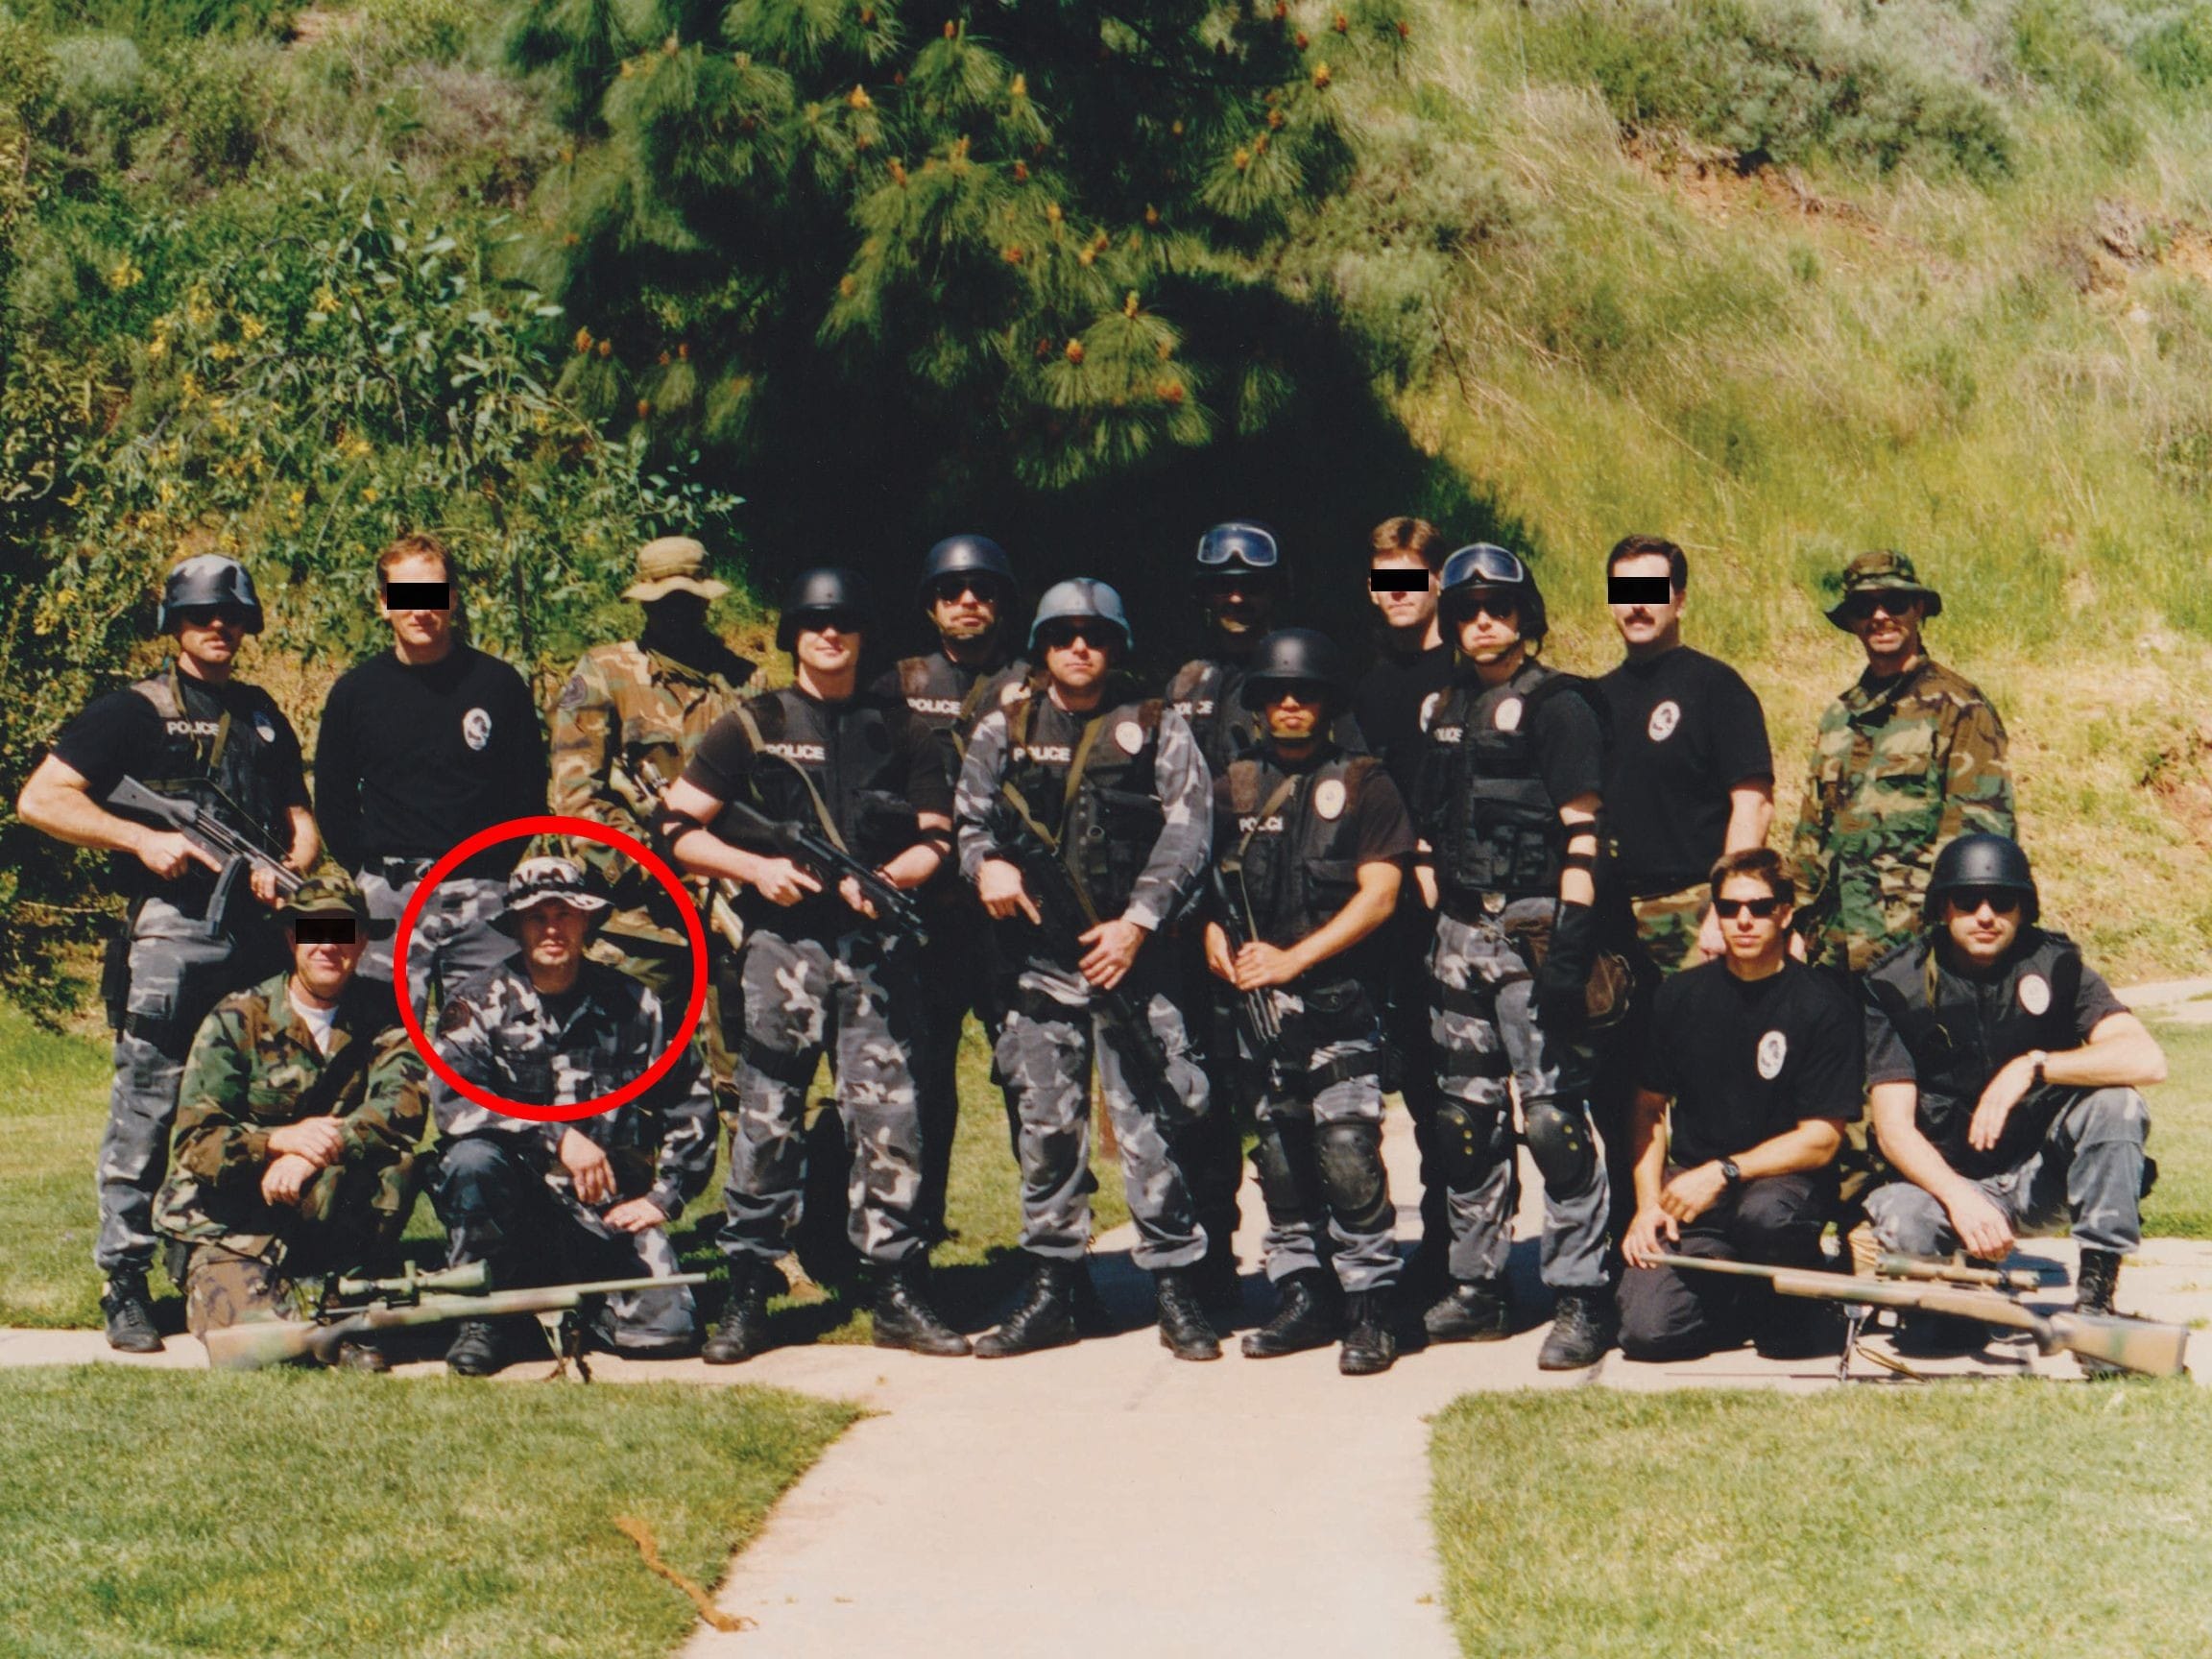 SWAT Officer Jim Wagner (in the red circle) with the Costa Mesa Police SWAT team (California), after a full day of training. He was on the team for three years.